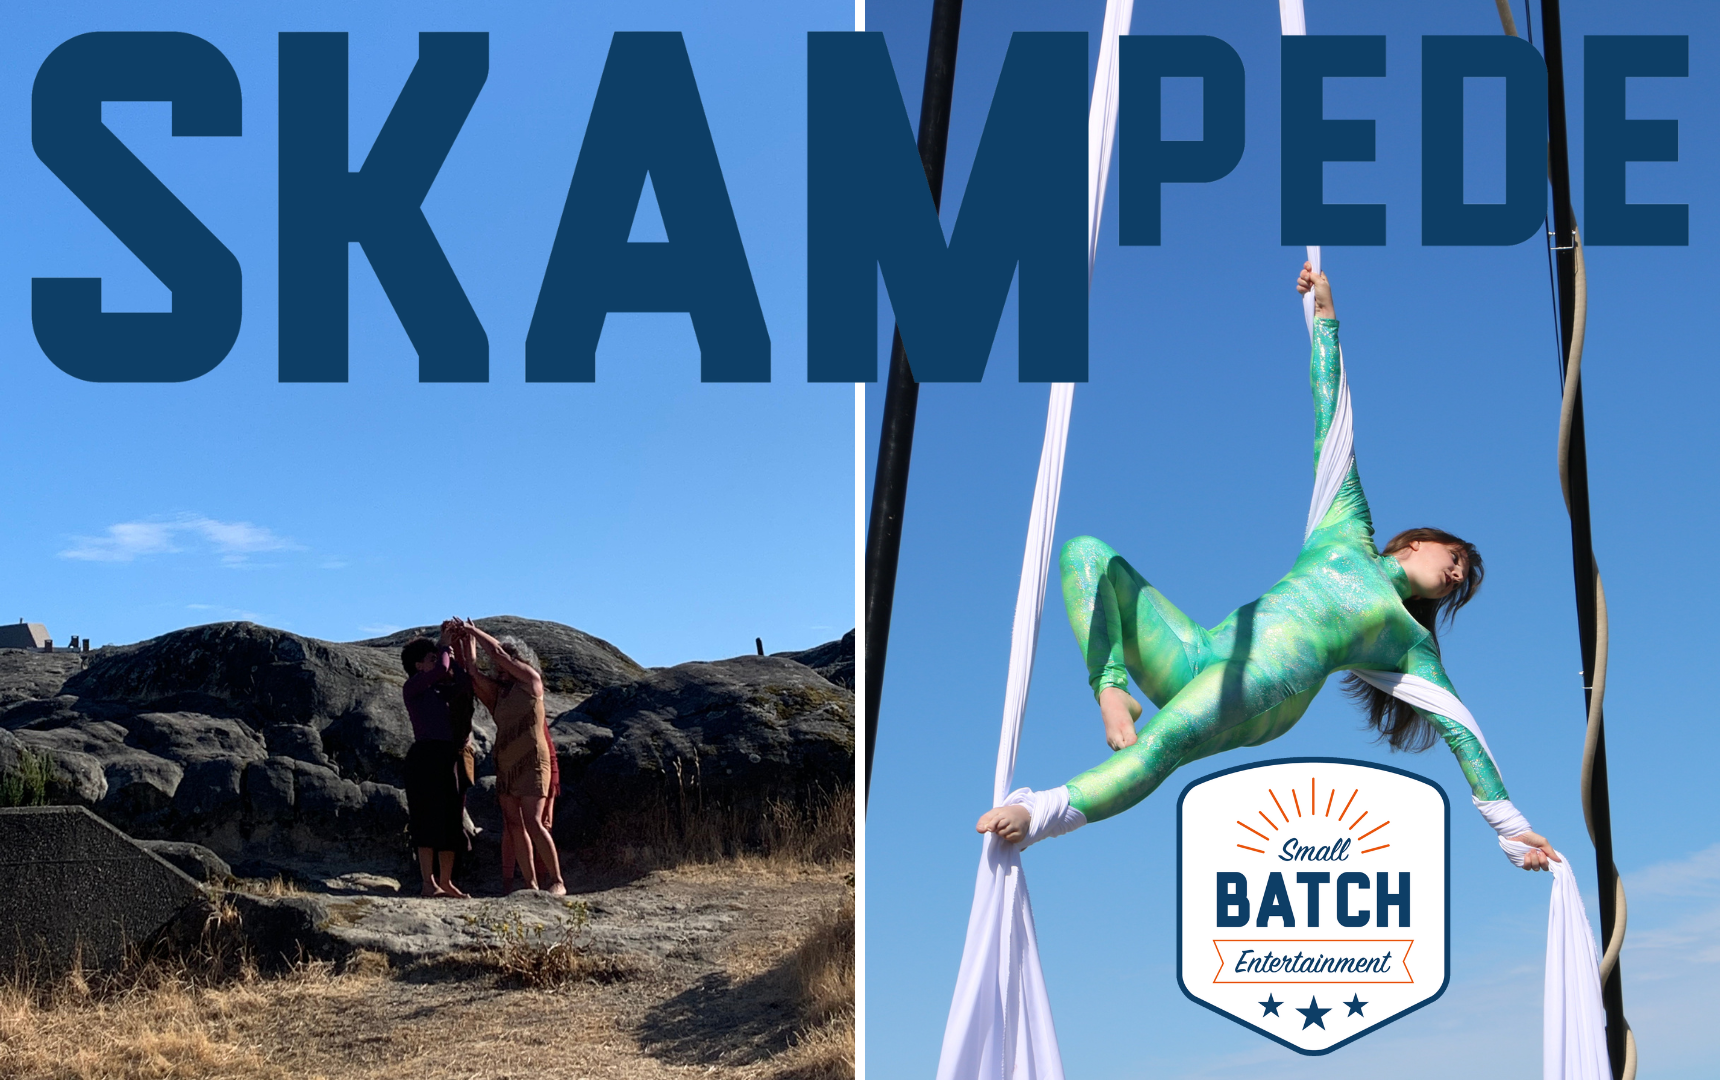 SKAMpede logos featuring two archival photos, one of the Visible Bodies Performance in 2021 and the other of an Aerialist at the Shipyard in 2021